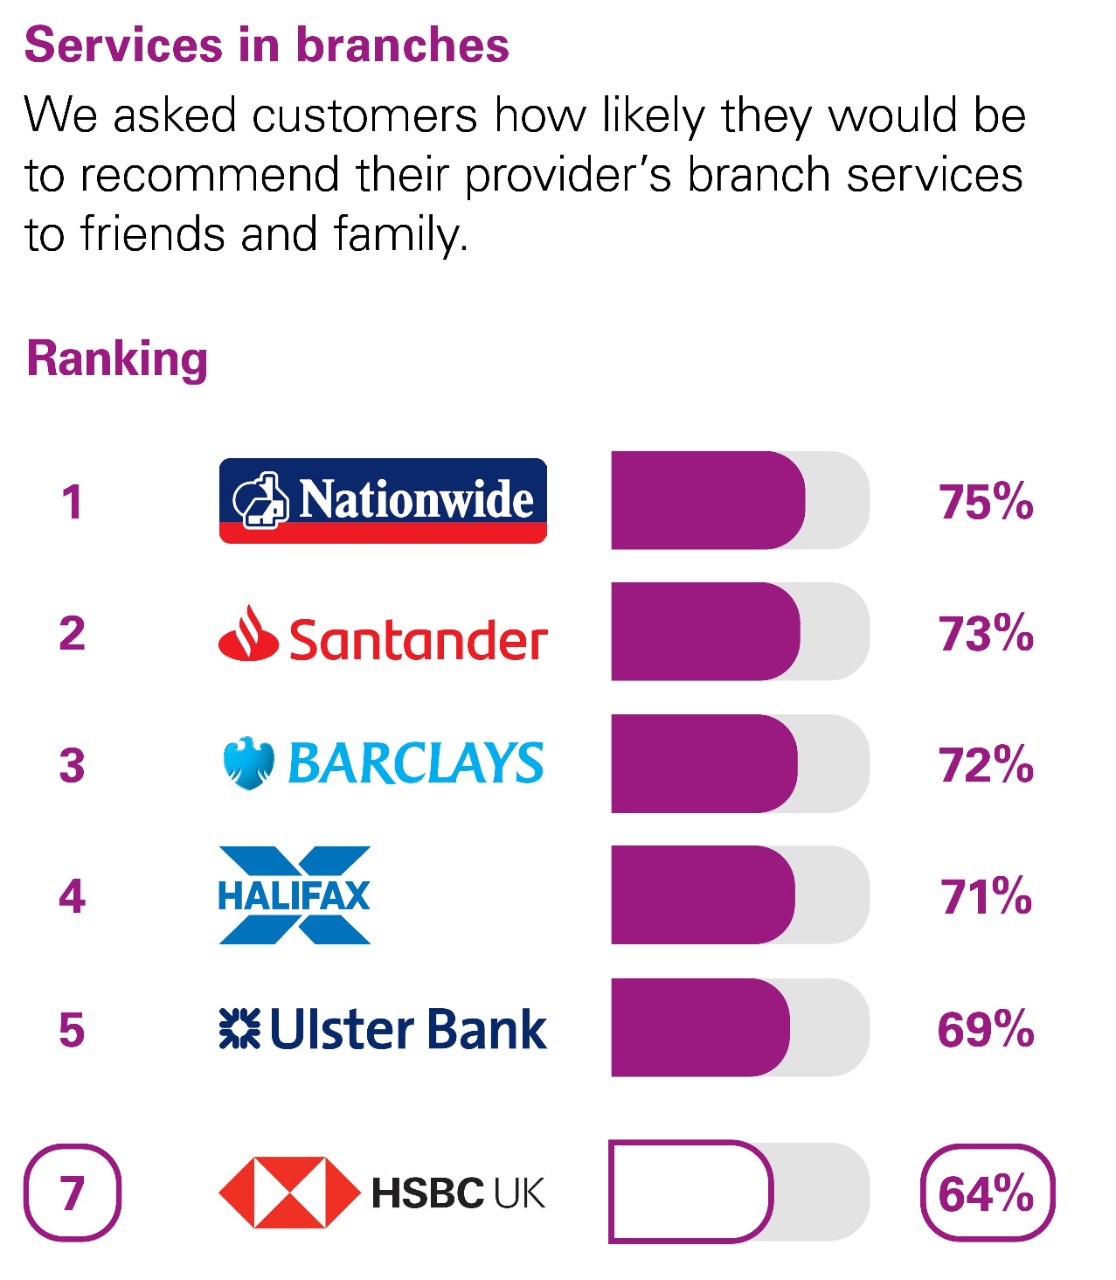 Services in branches. We asked customers how likely they would be to recommend their provider’s branch services to friends and family. Ranking: 1 Nationwide 75% 2 Santander 73% 3 Barclays 72% 4 Halifax 71% 5 Ulster Bank 69% 7 HSBC UK 64%.